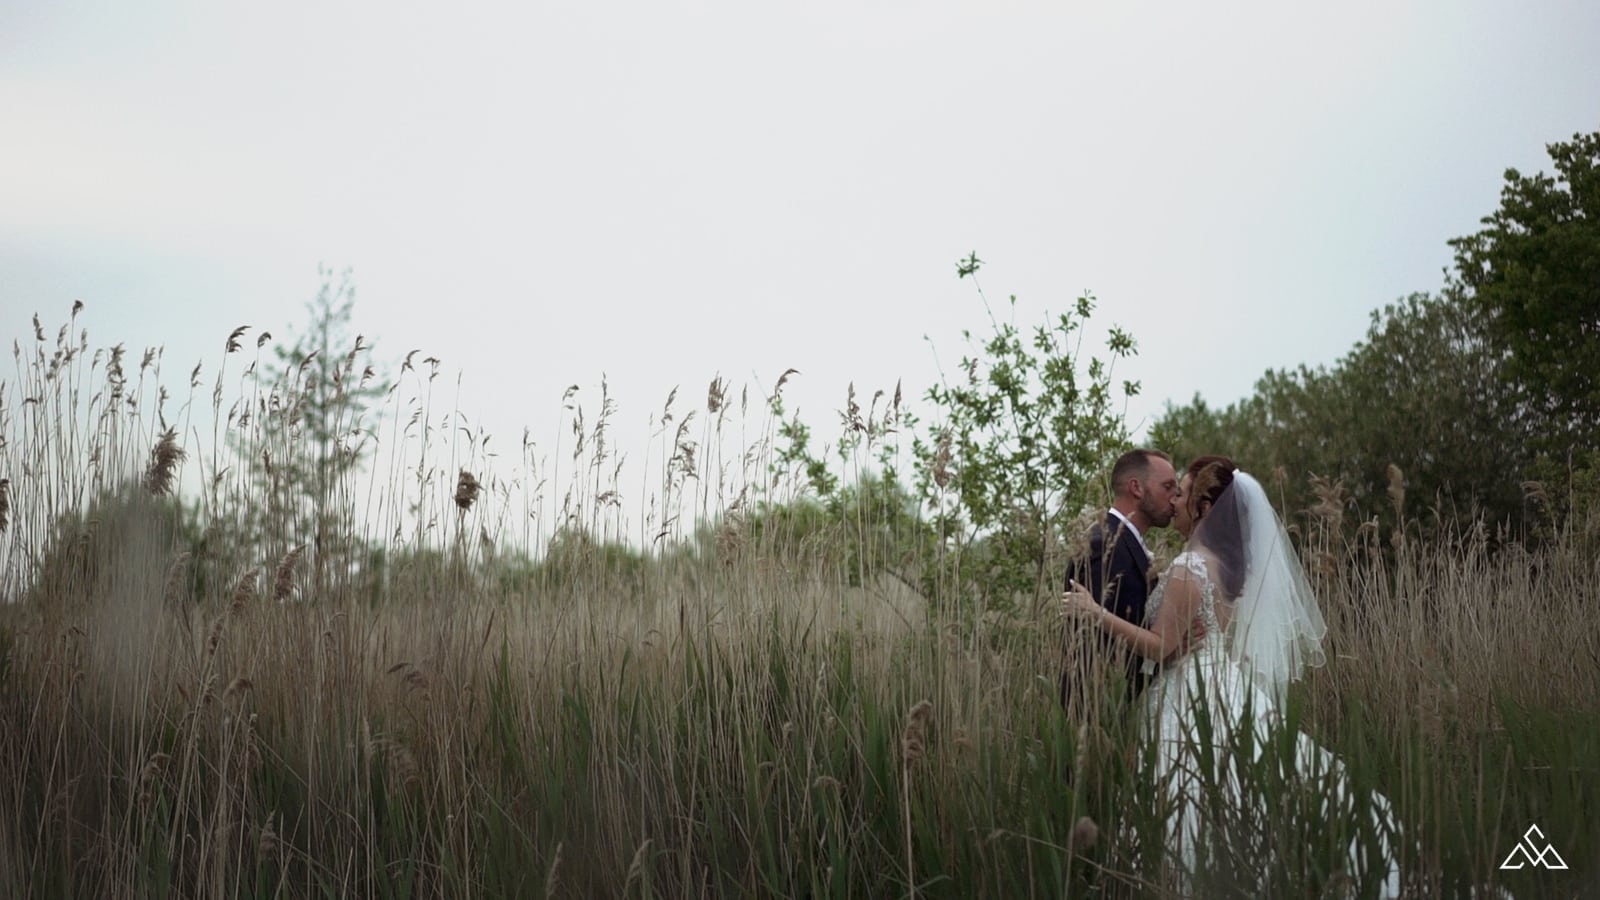 Coastal Vows in Motion: Gold Coast's Skilled Wedding Videographer